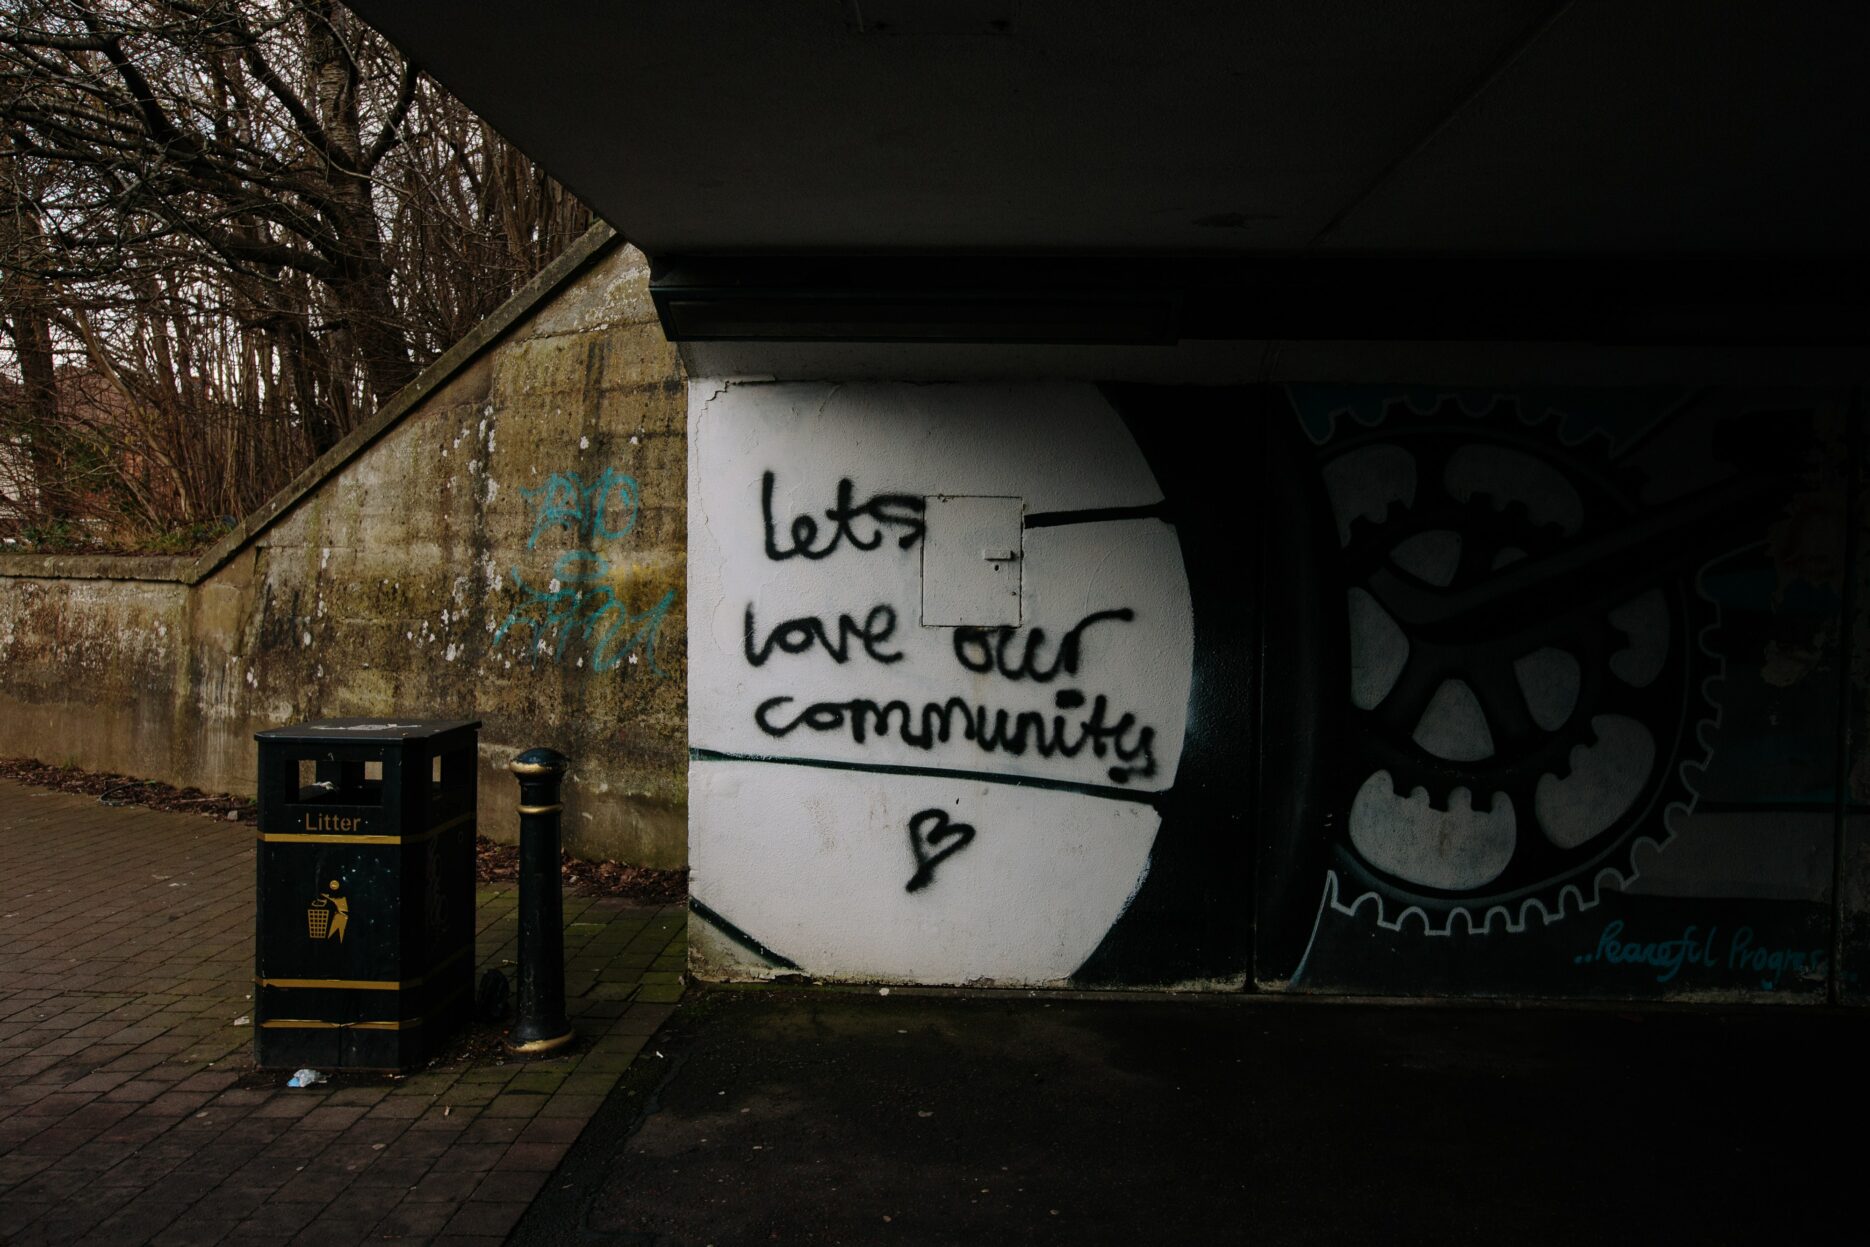 Graffiti on a stucco wall reads, "Let's love our community."